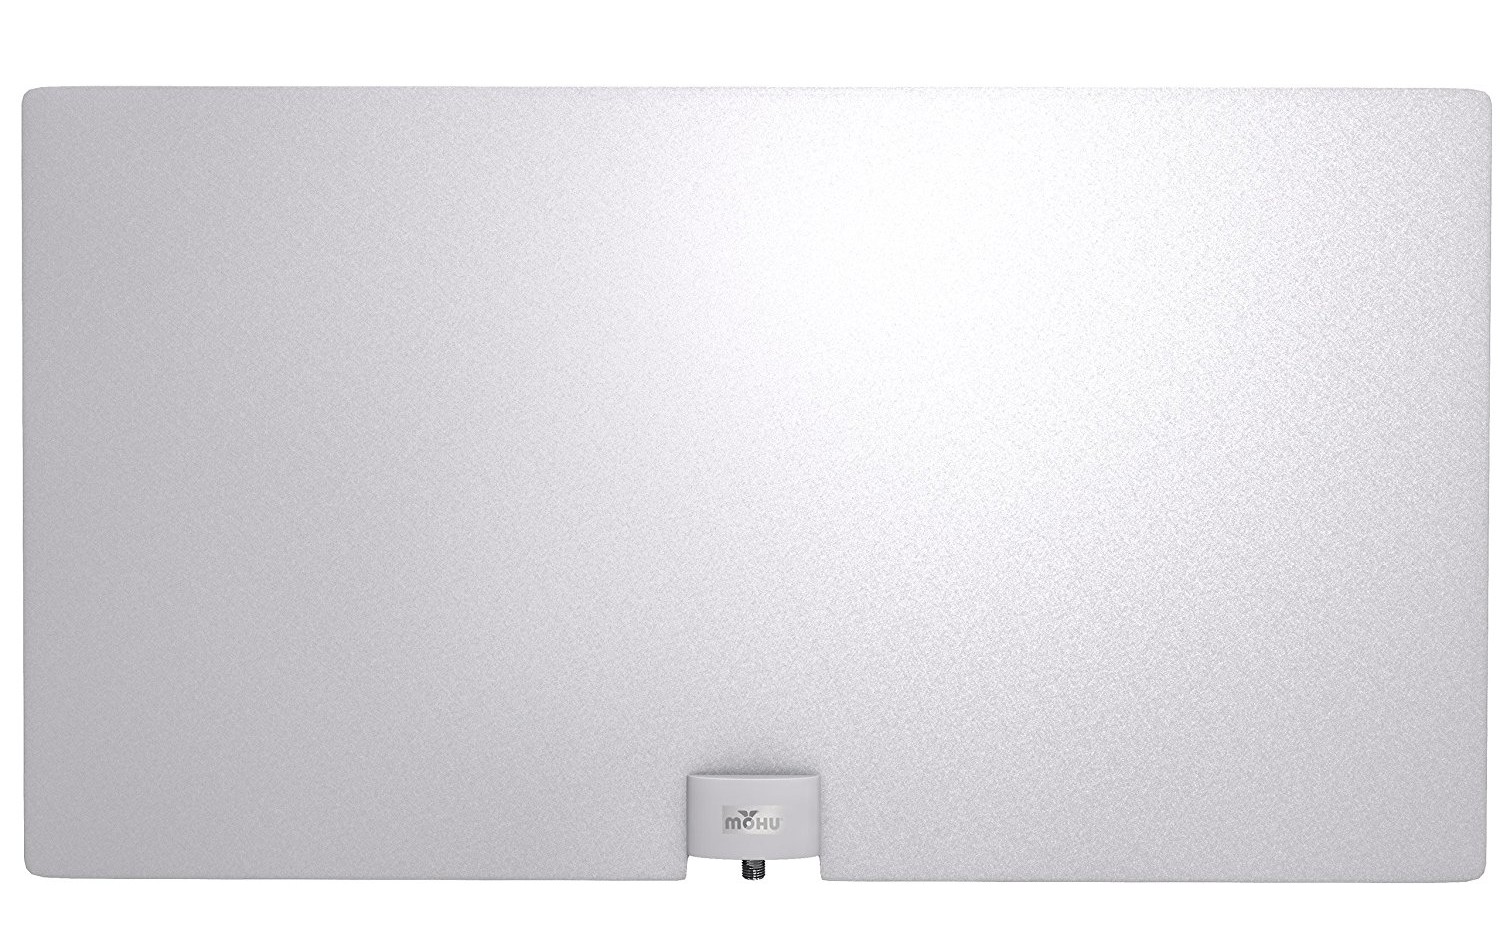 Mohu Leaf Glide 65-Mile Antenna Review – (One of The Best Indoor Antennas We Ever Tested)